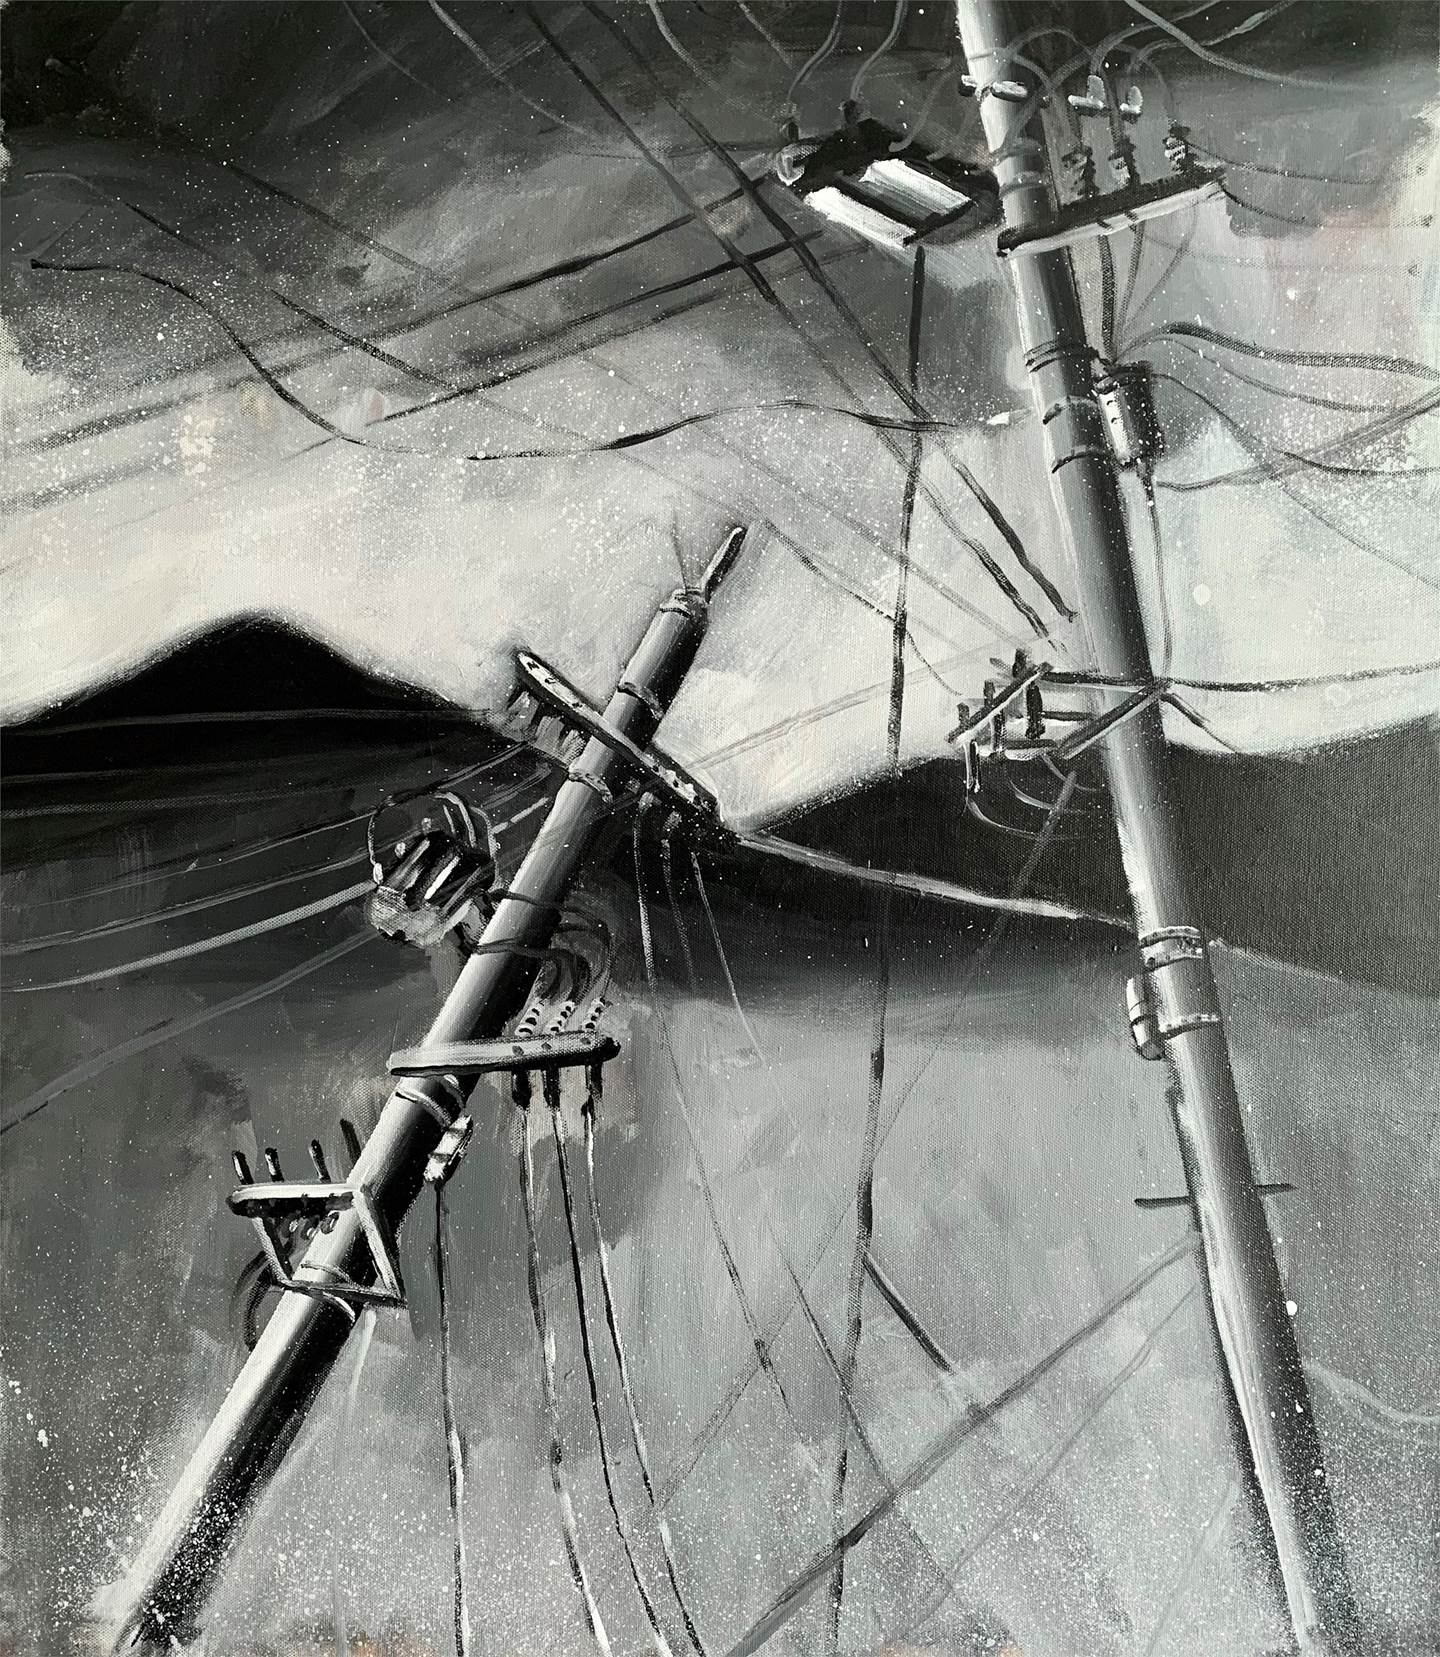 Utility poles and mountains, original Minimalist Acrylic Painting by Qiao Xi